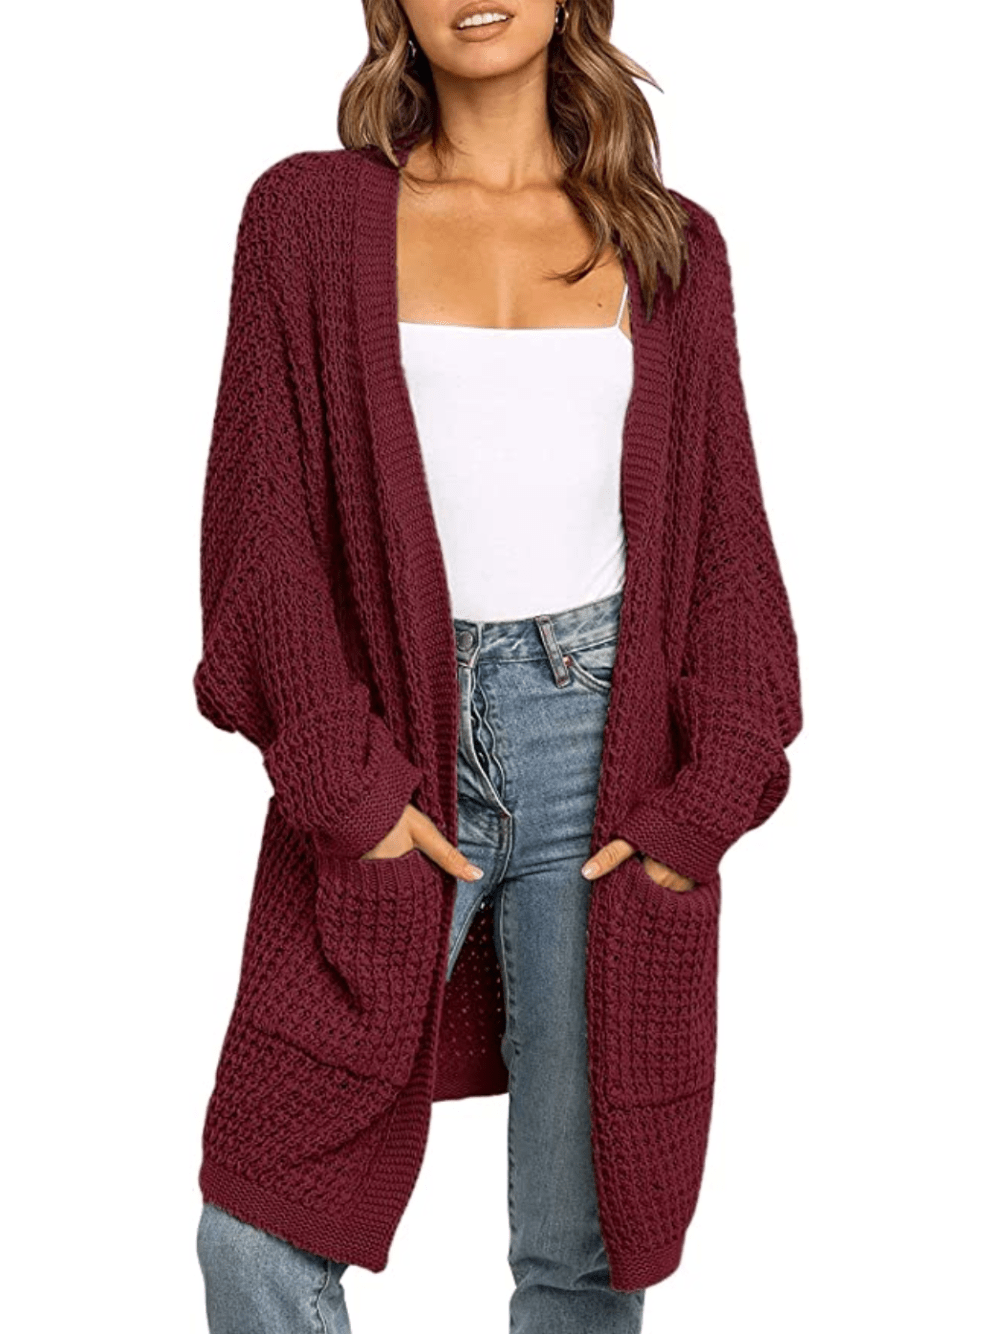 Merokeety Cozy Fall Sweater Is the ‘Perfect Amount of Oversized’